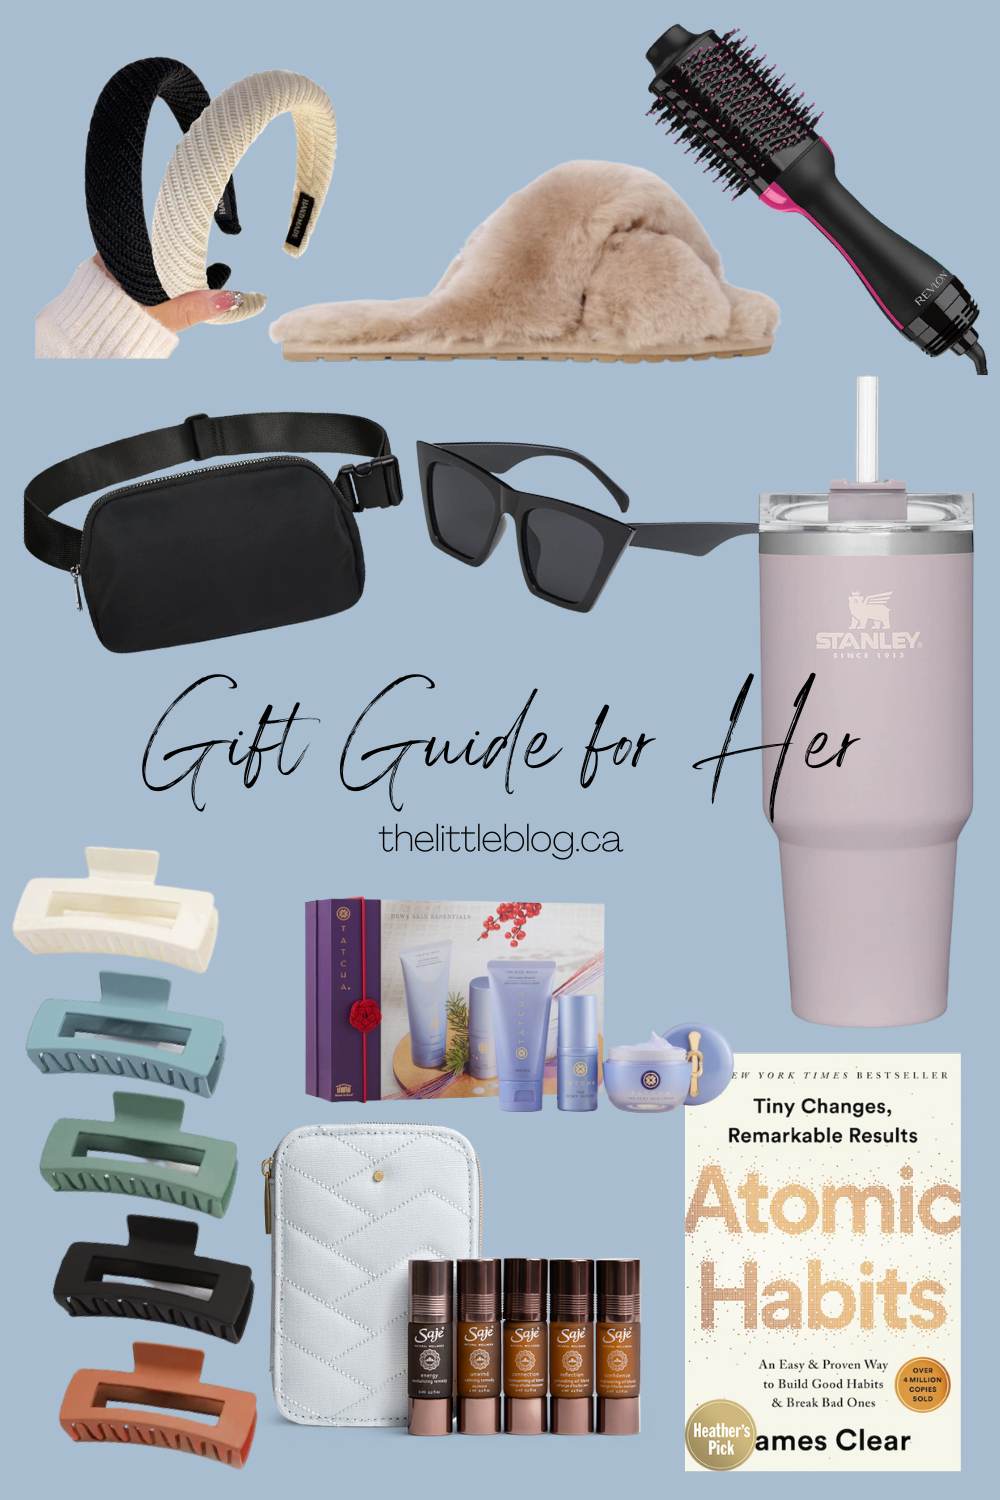 Gift Guide for her